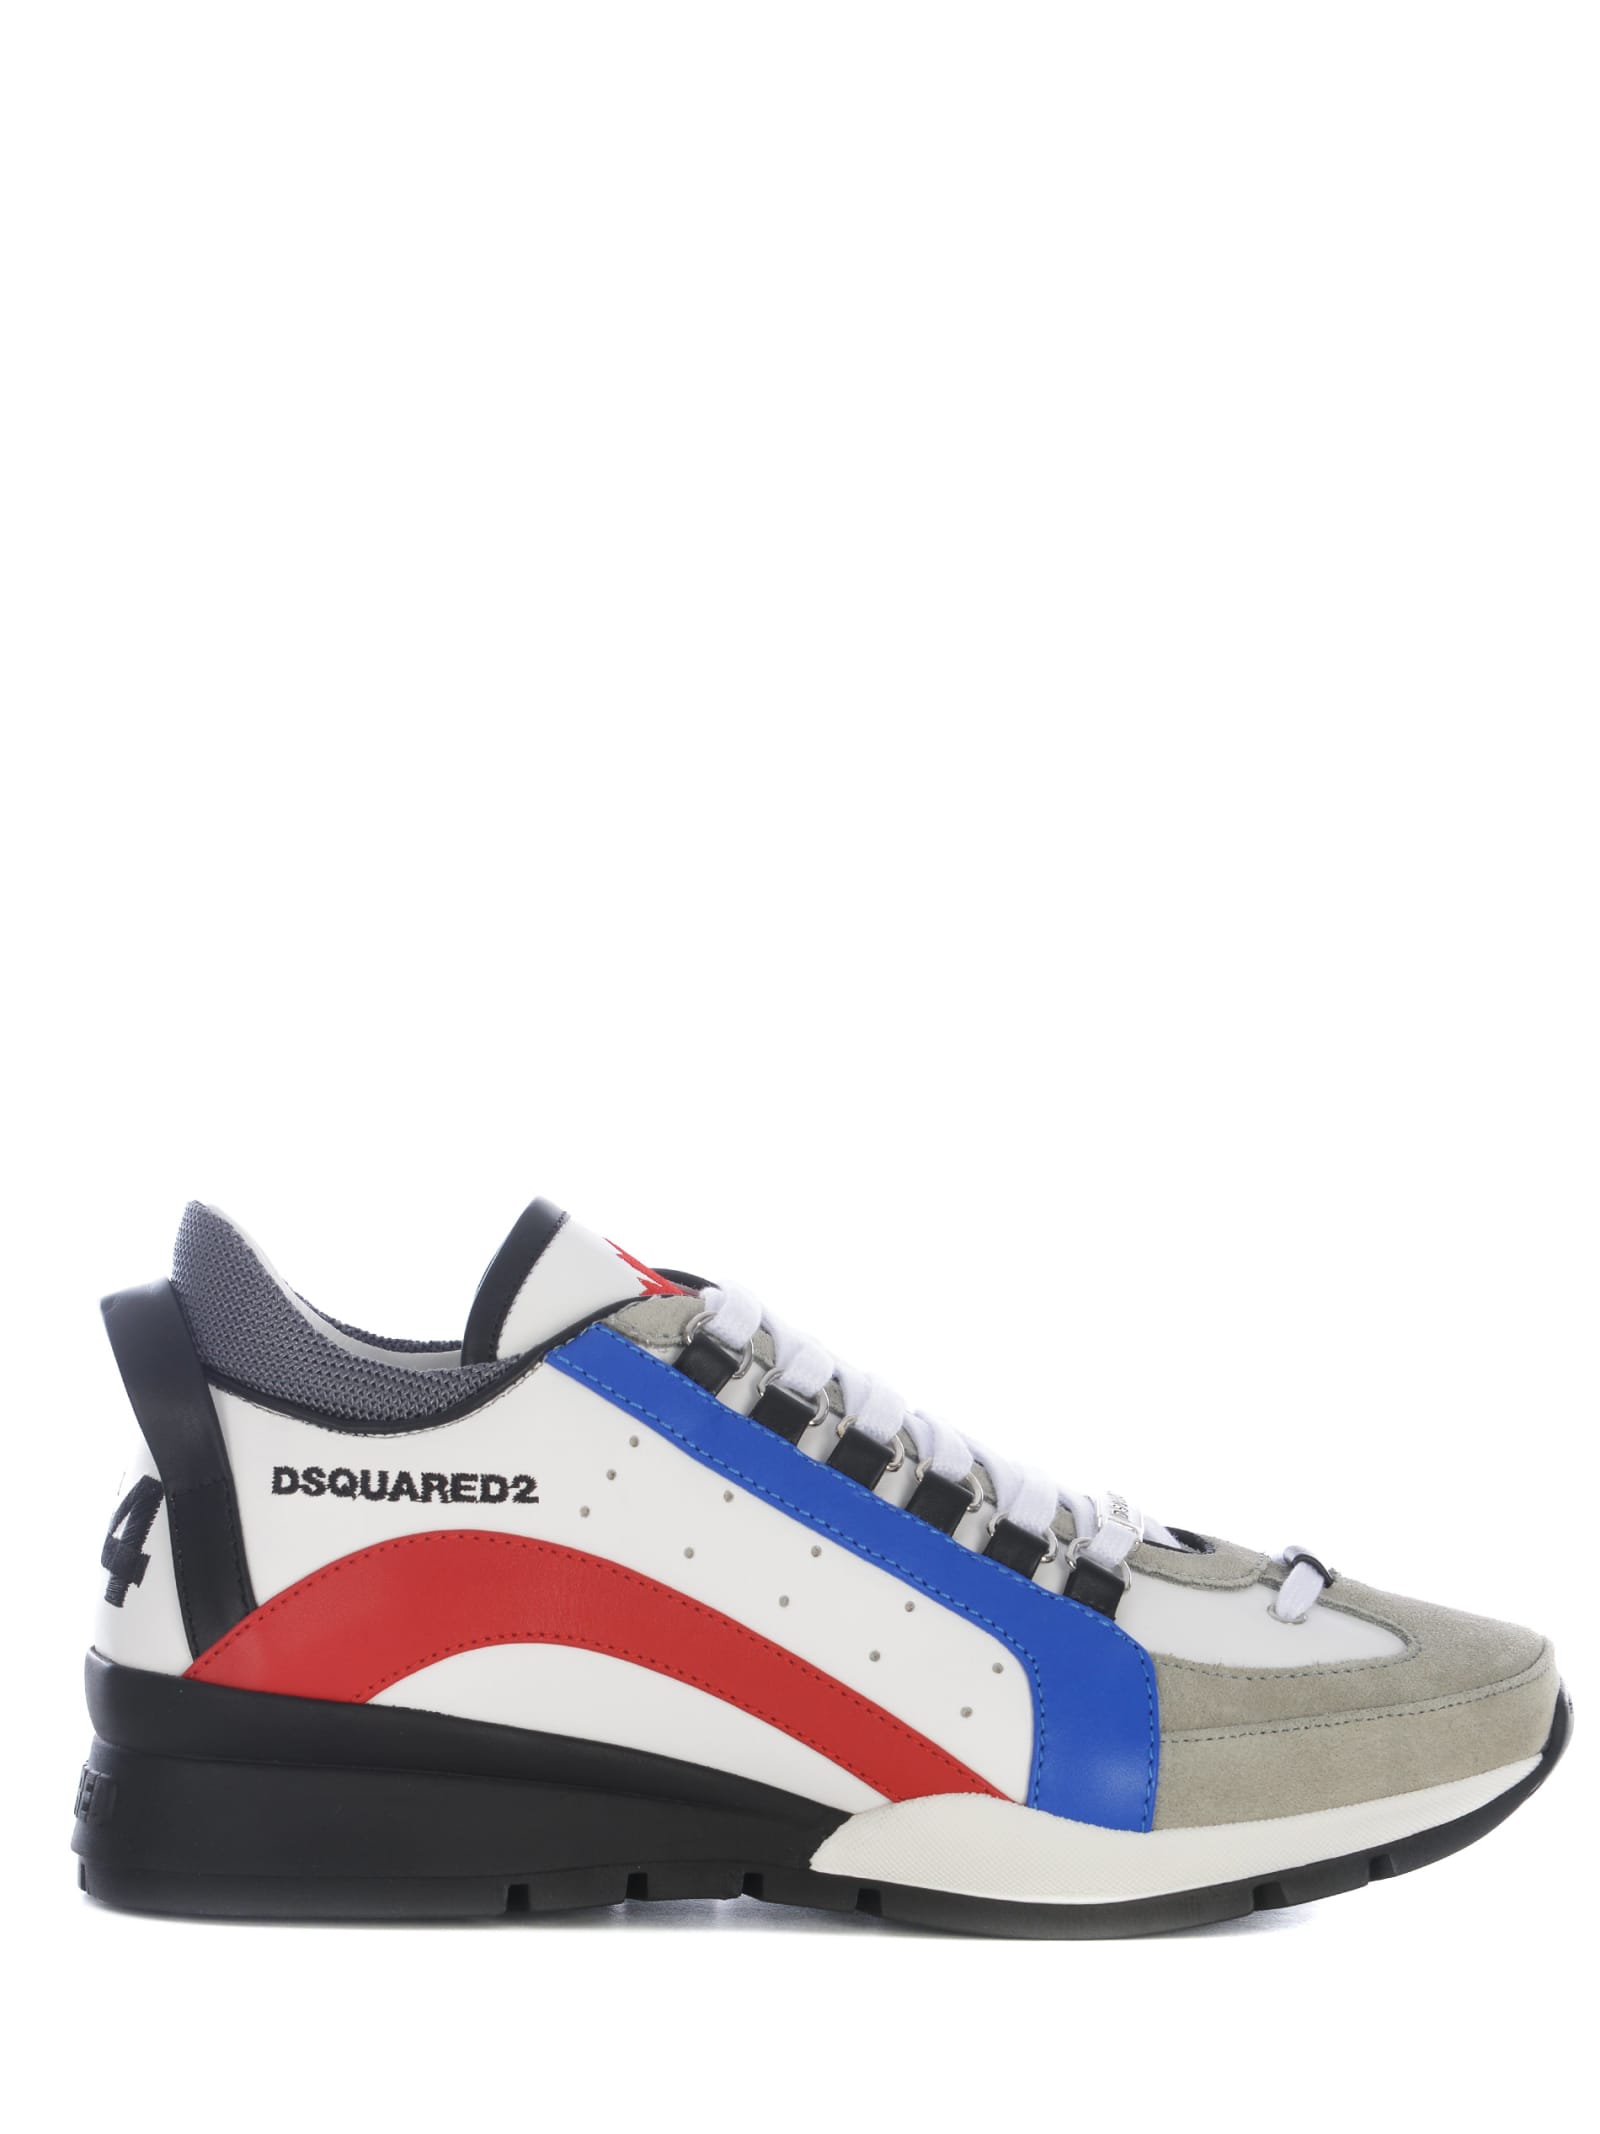 Dsquared2 Sneakers  Legendary Made Of Leather In Bianco/blu/rosso